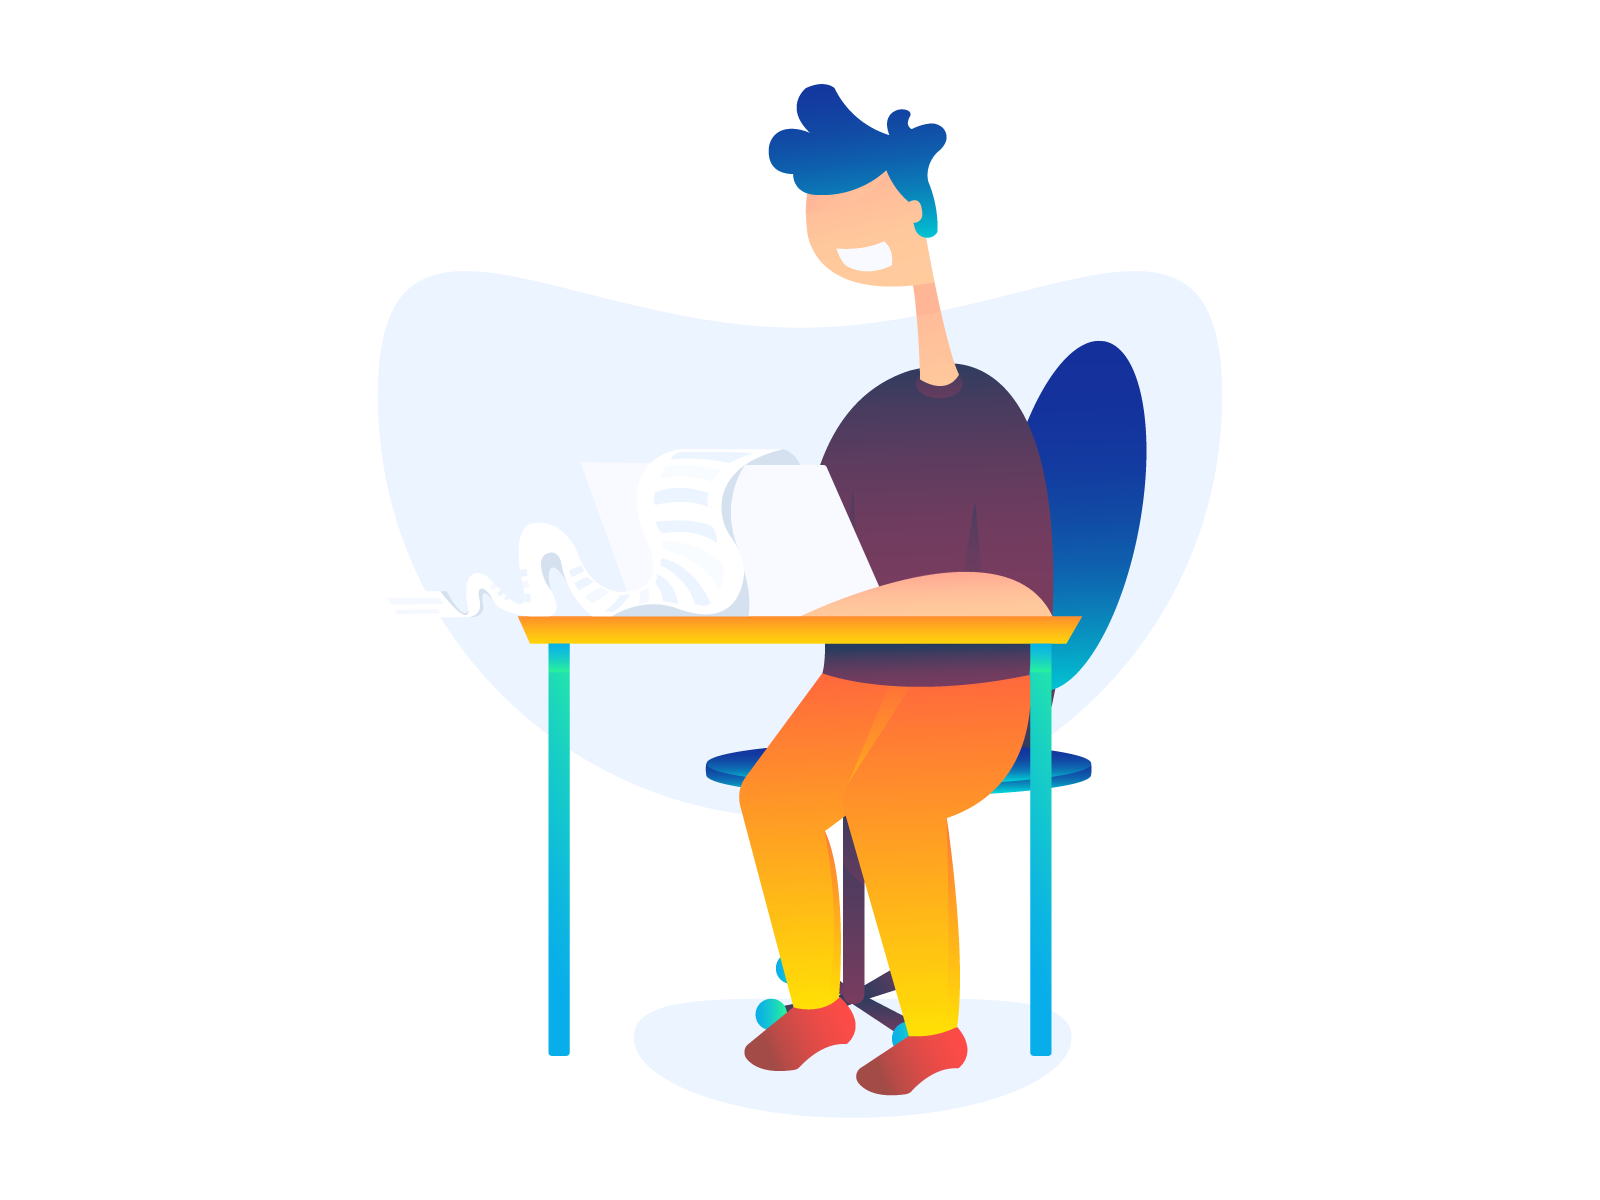 Tom flat. Working conditions illustrations. Terms and conditions illustrations Dribbble.